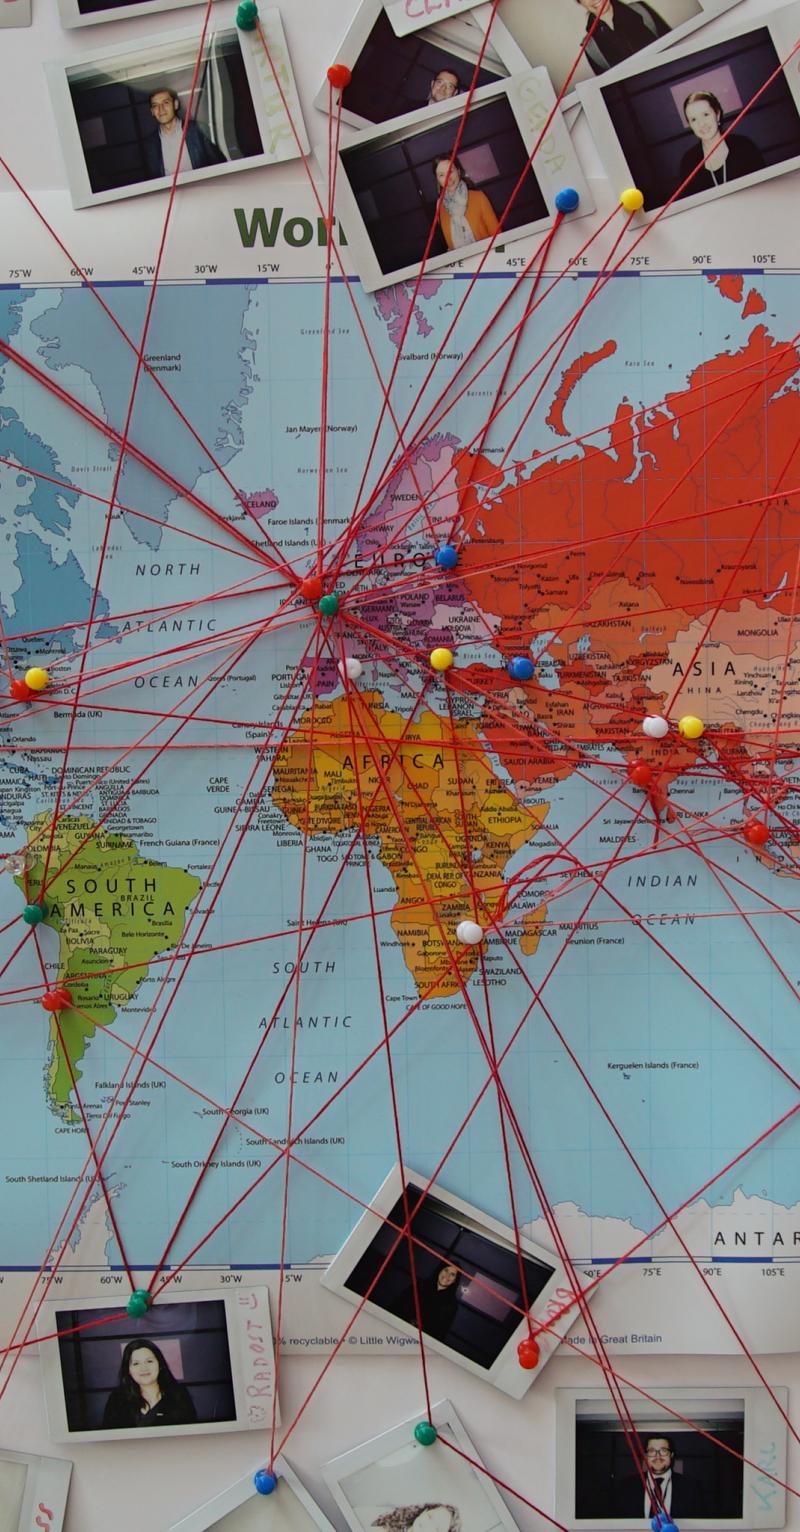 A map of the world on a wall with photographs surrounding it and red threads running from the photos to localities all over the map